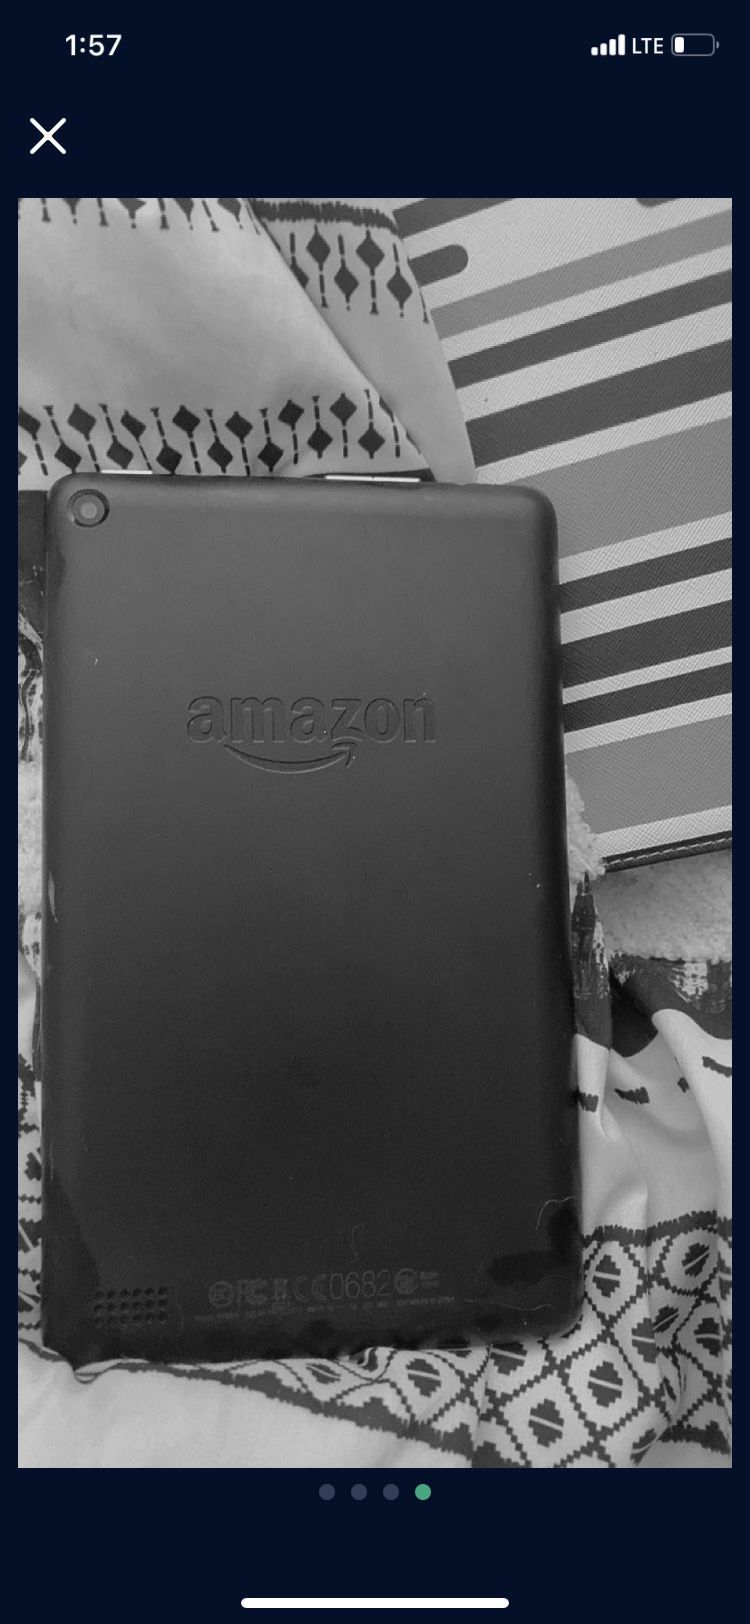 Tablet Amazon Fire 7inch 